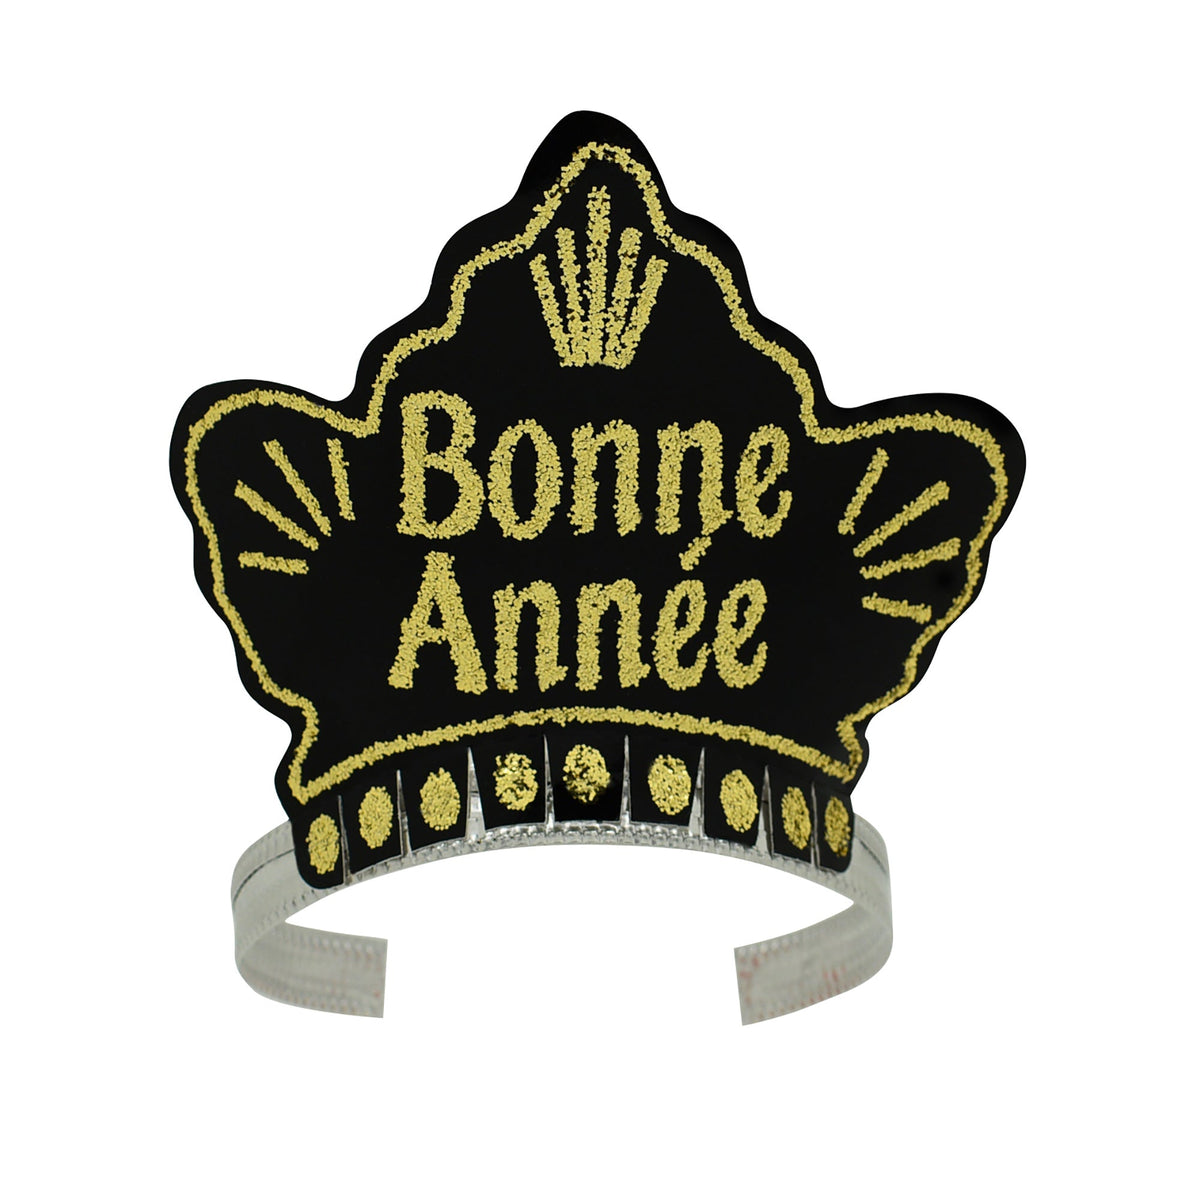 PARTY TIME MFG New Year "Bonne Année" Black Glittered Tiara, 1 Count 010372106187